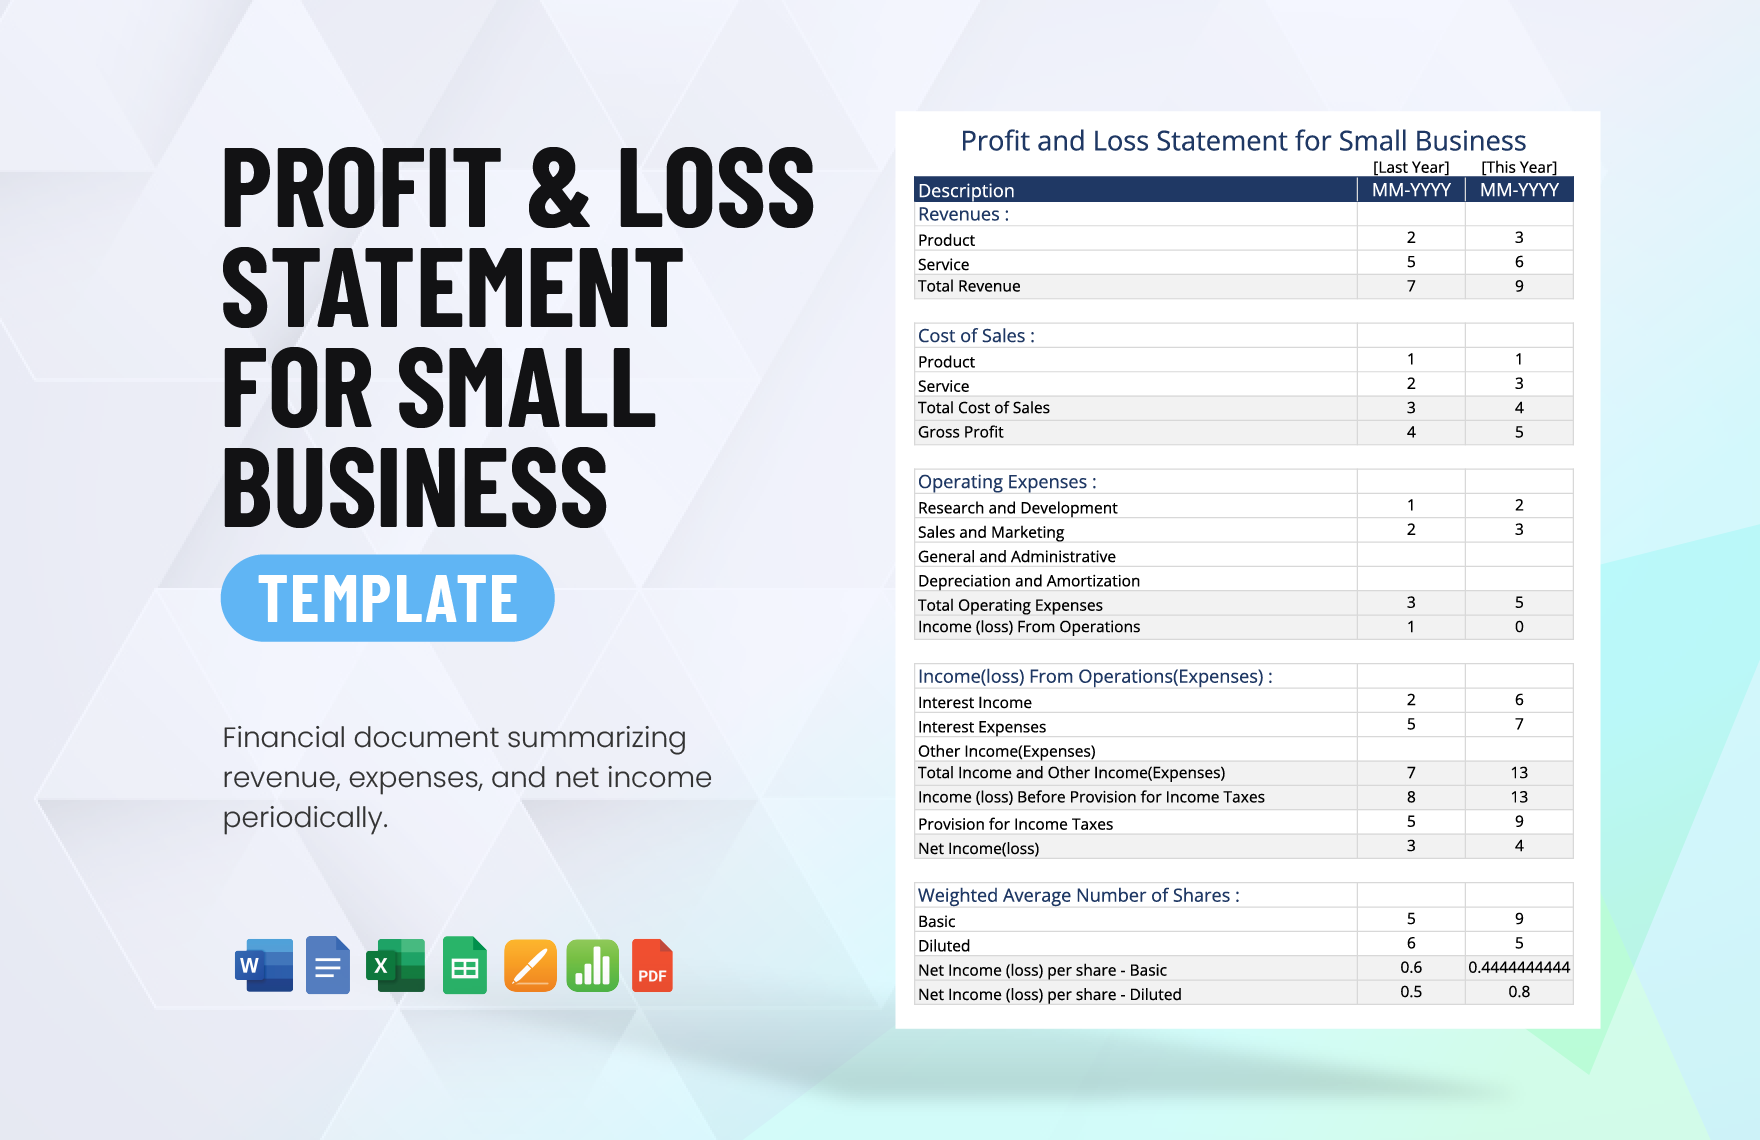 Profit and Loss Statement For Small Business Template in Word, Google Docs, Excel, PDF, Google Sheets, Apple Pages, Apple Numbers